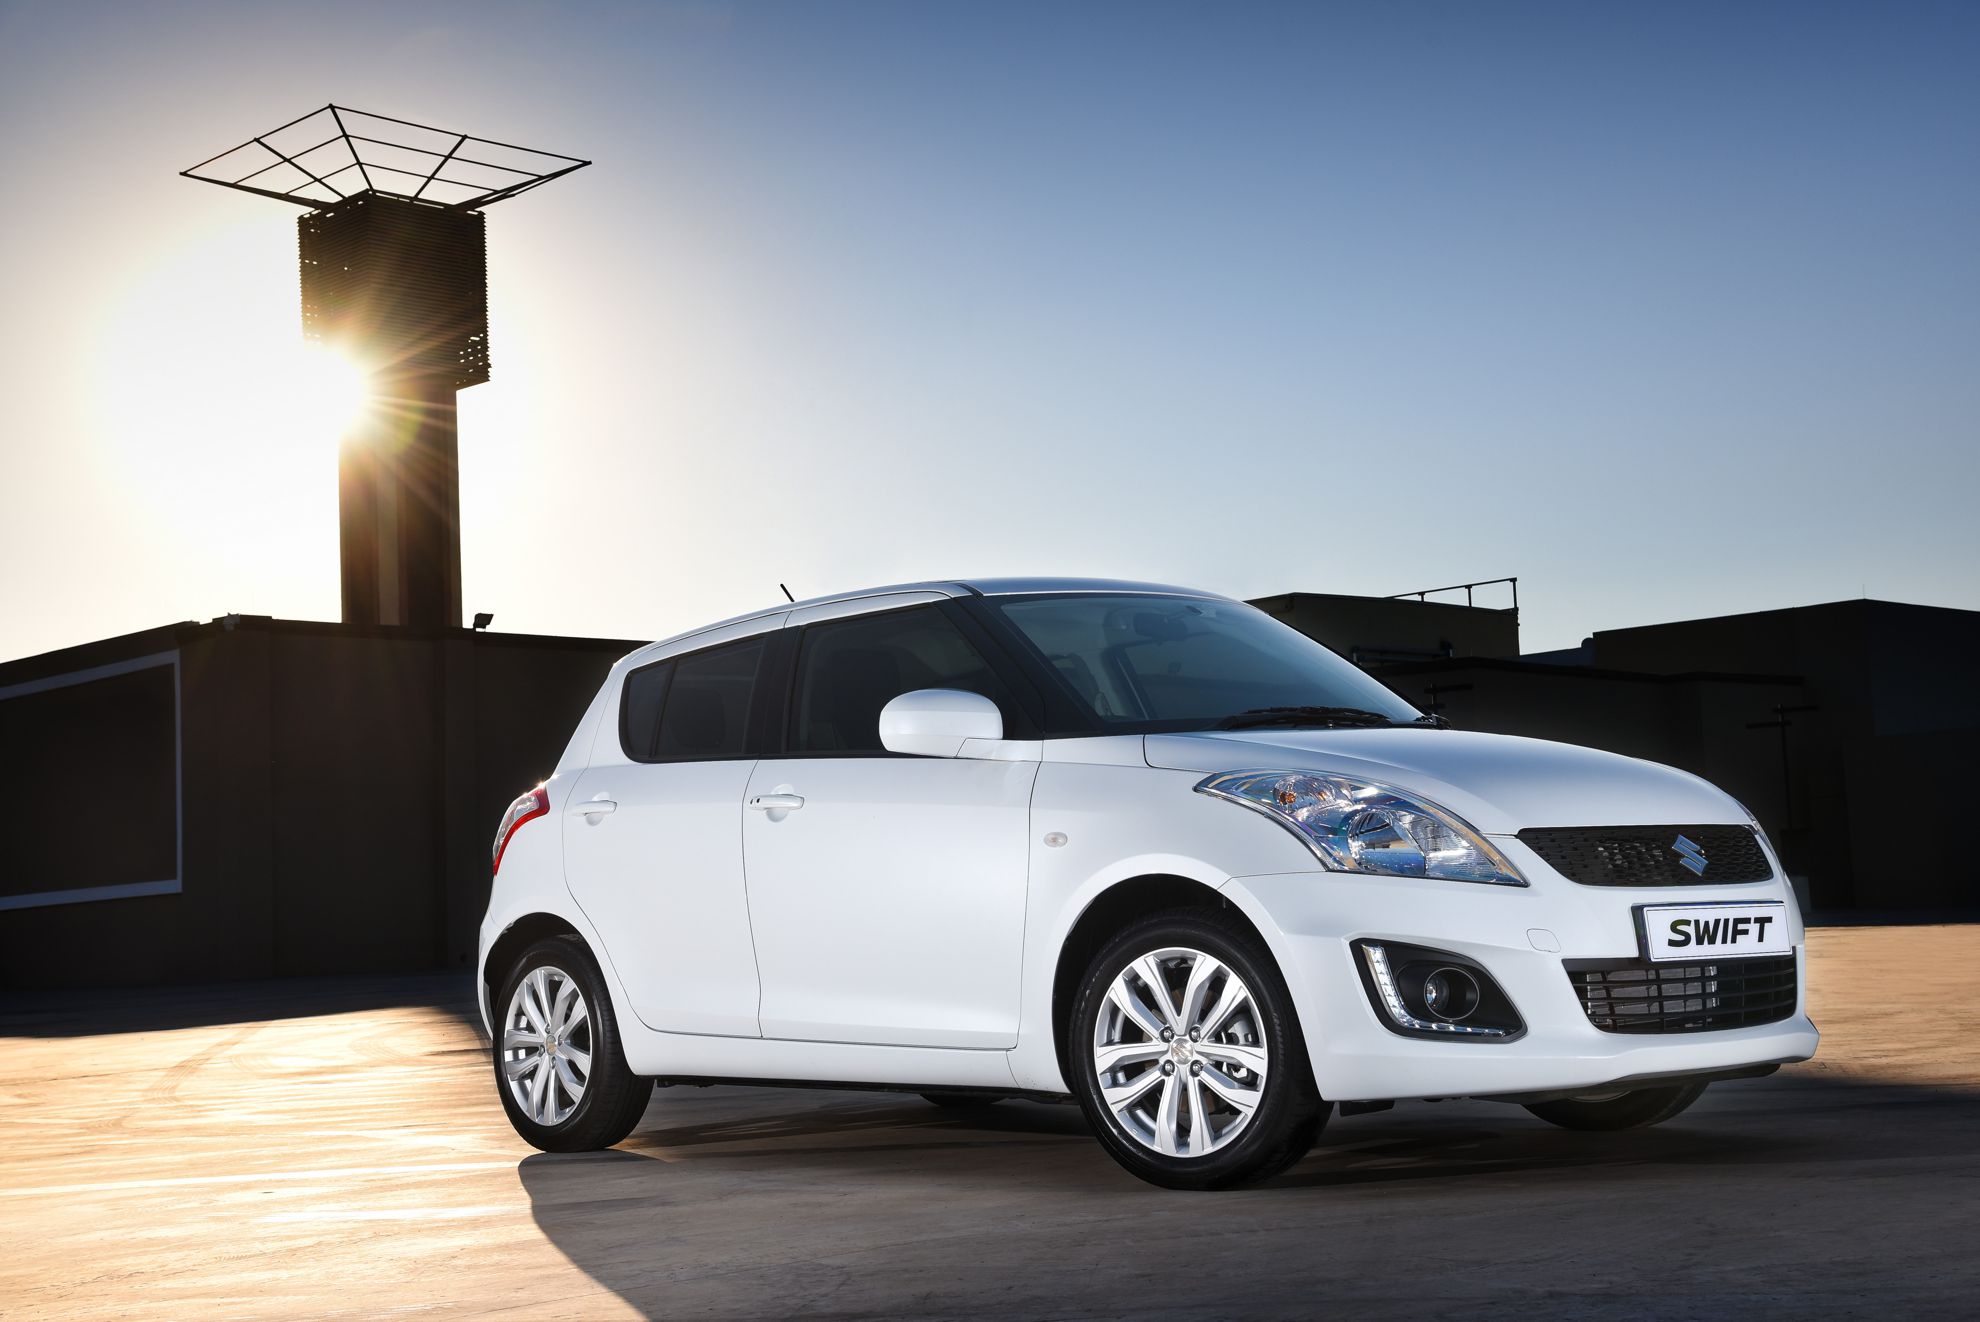 Suzuki Swift a compact car for every occasion